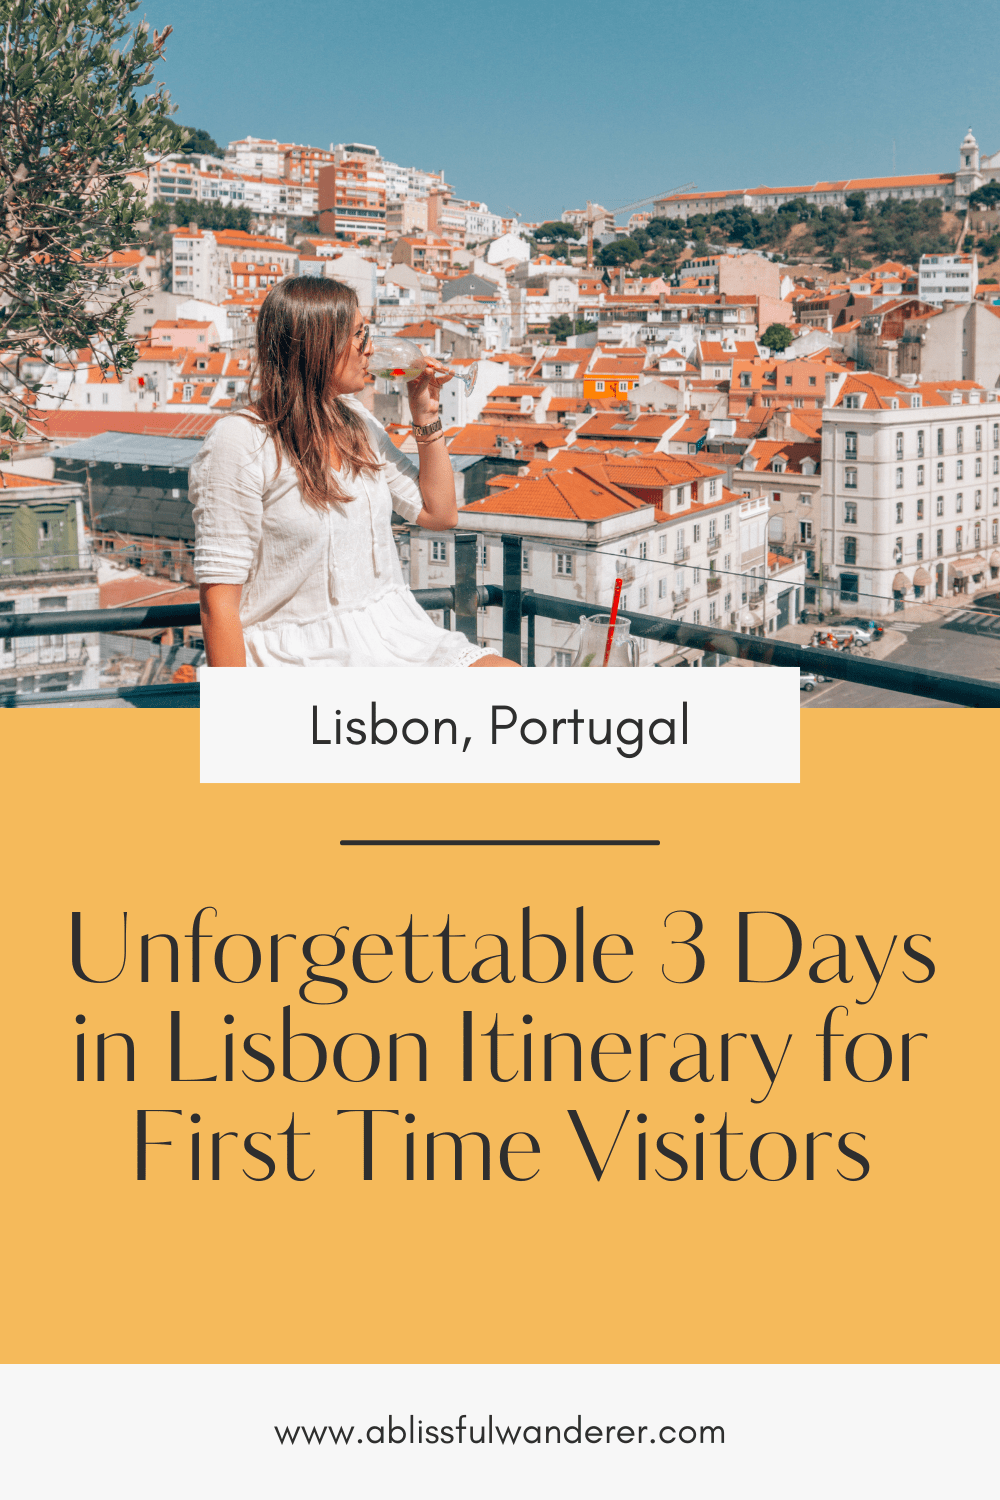 Unforgettable 3 Days in Lisbon Itinerary for First Time Visitors pin with one photo